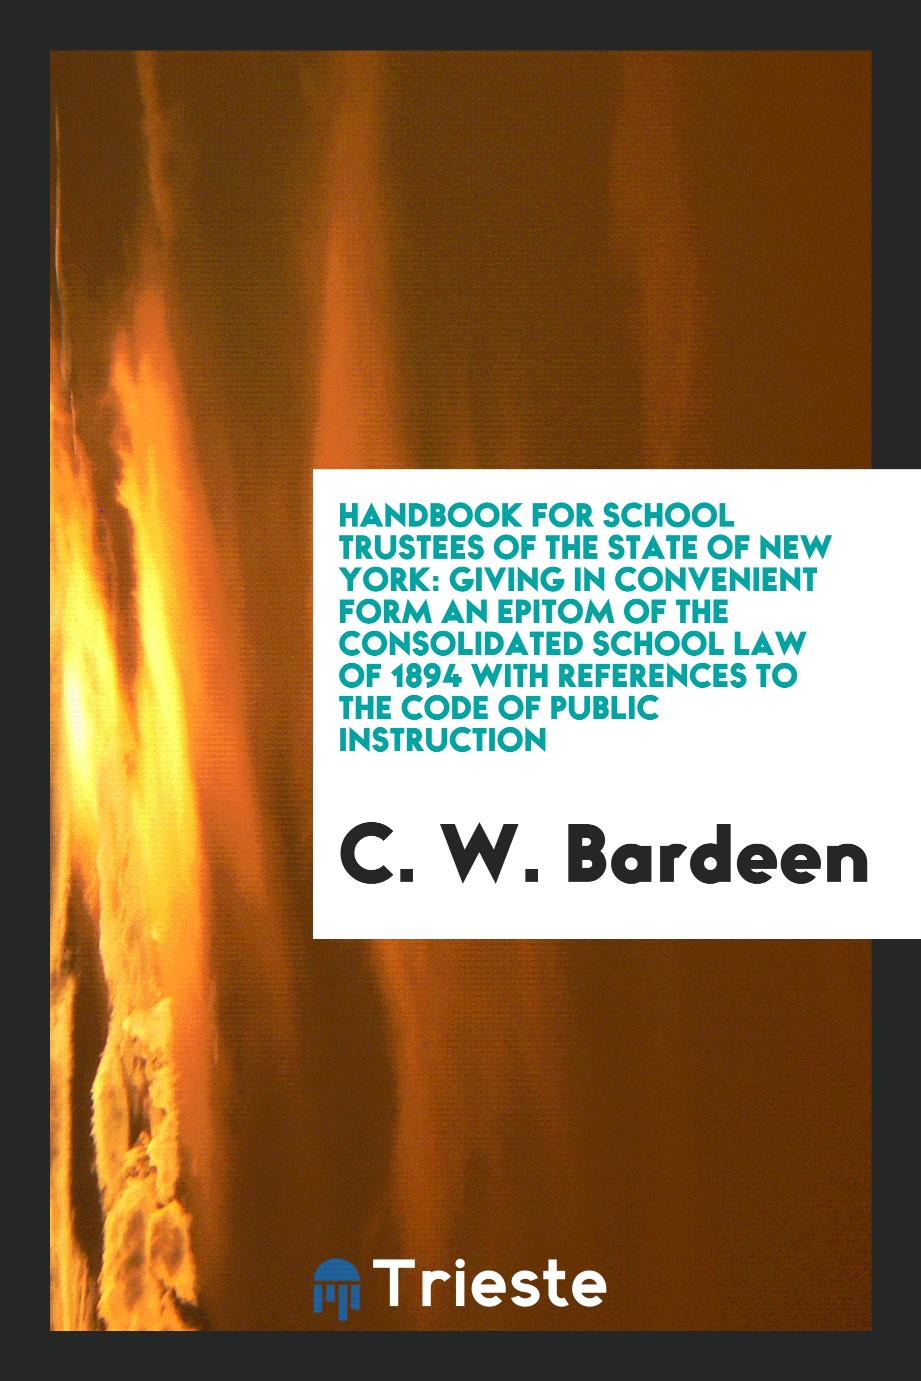 Handbook for School Trustees of the State of New York: Giving in Convenient Form an Epitom of the Consolidated School Law of 1894 with References to the Code of Public Instruction